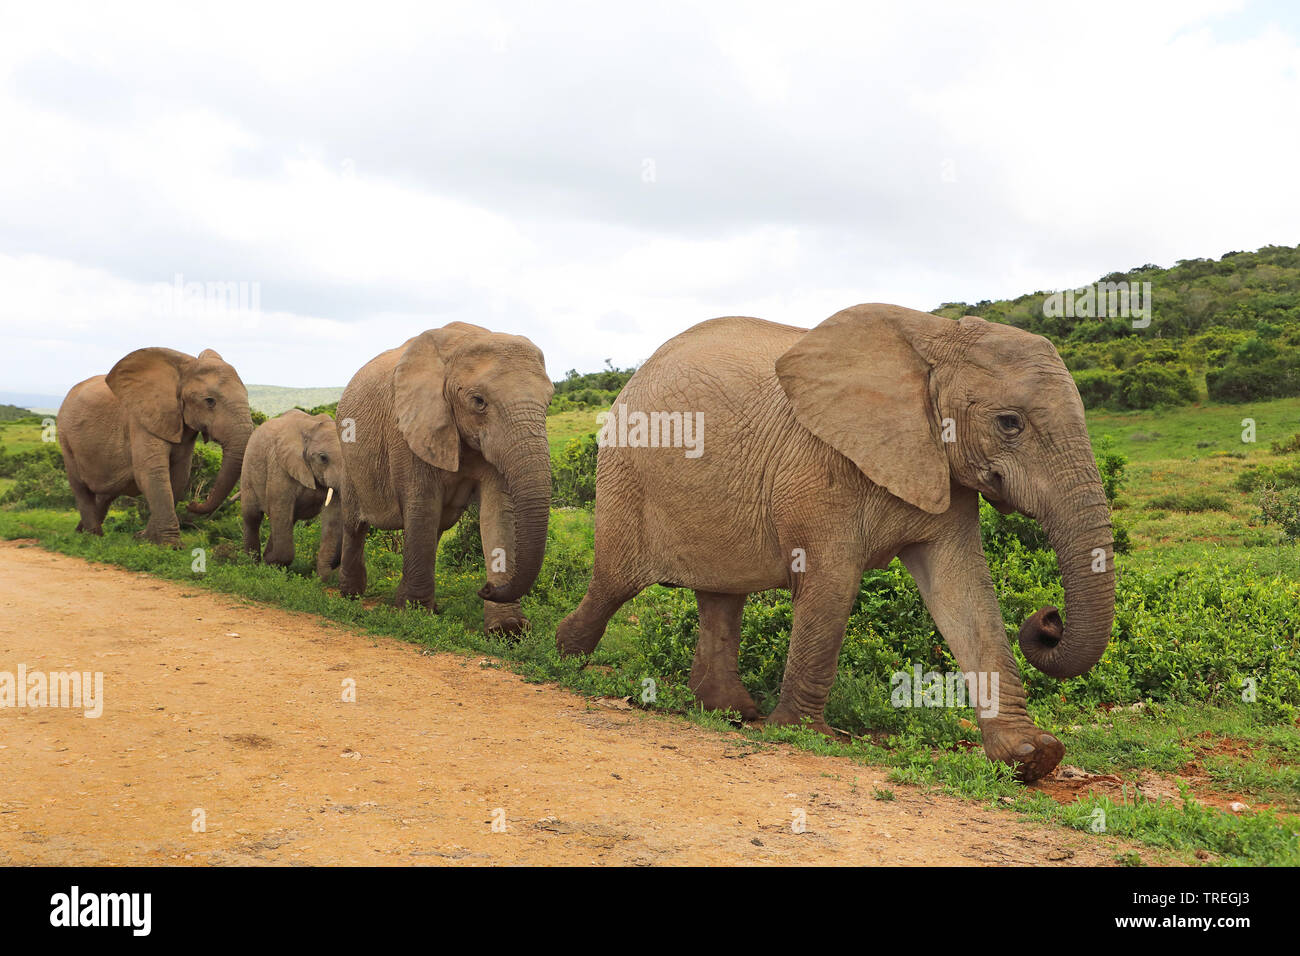 African elephant (Loxodonta africana), herd on its way to a water hole, South Africa, Eastern Cape, Addo Elephant National Park Stock Photo